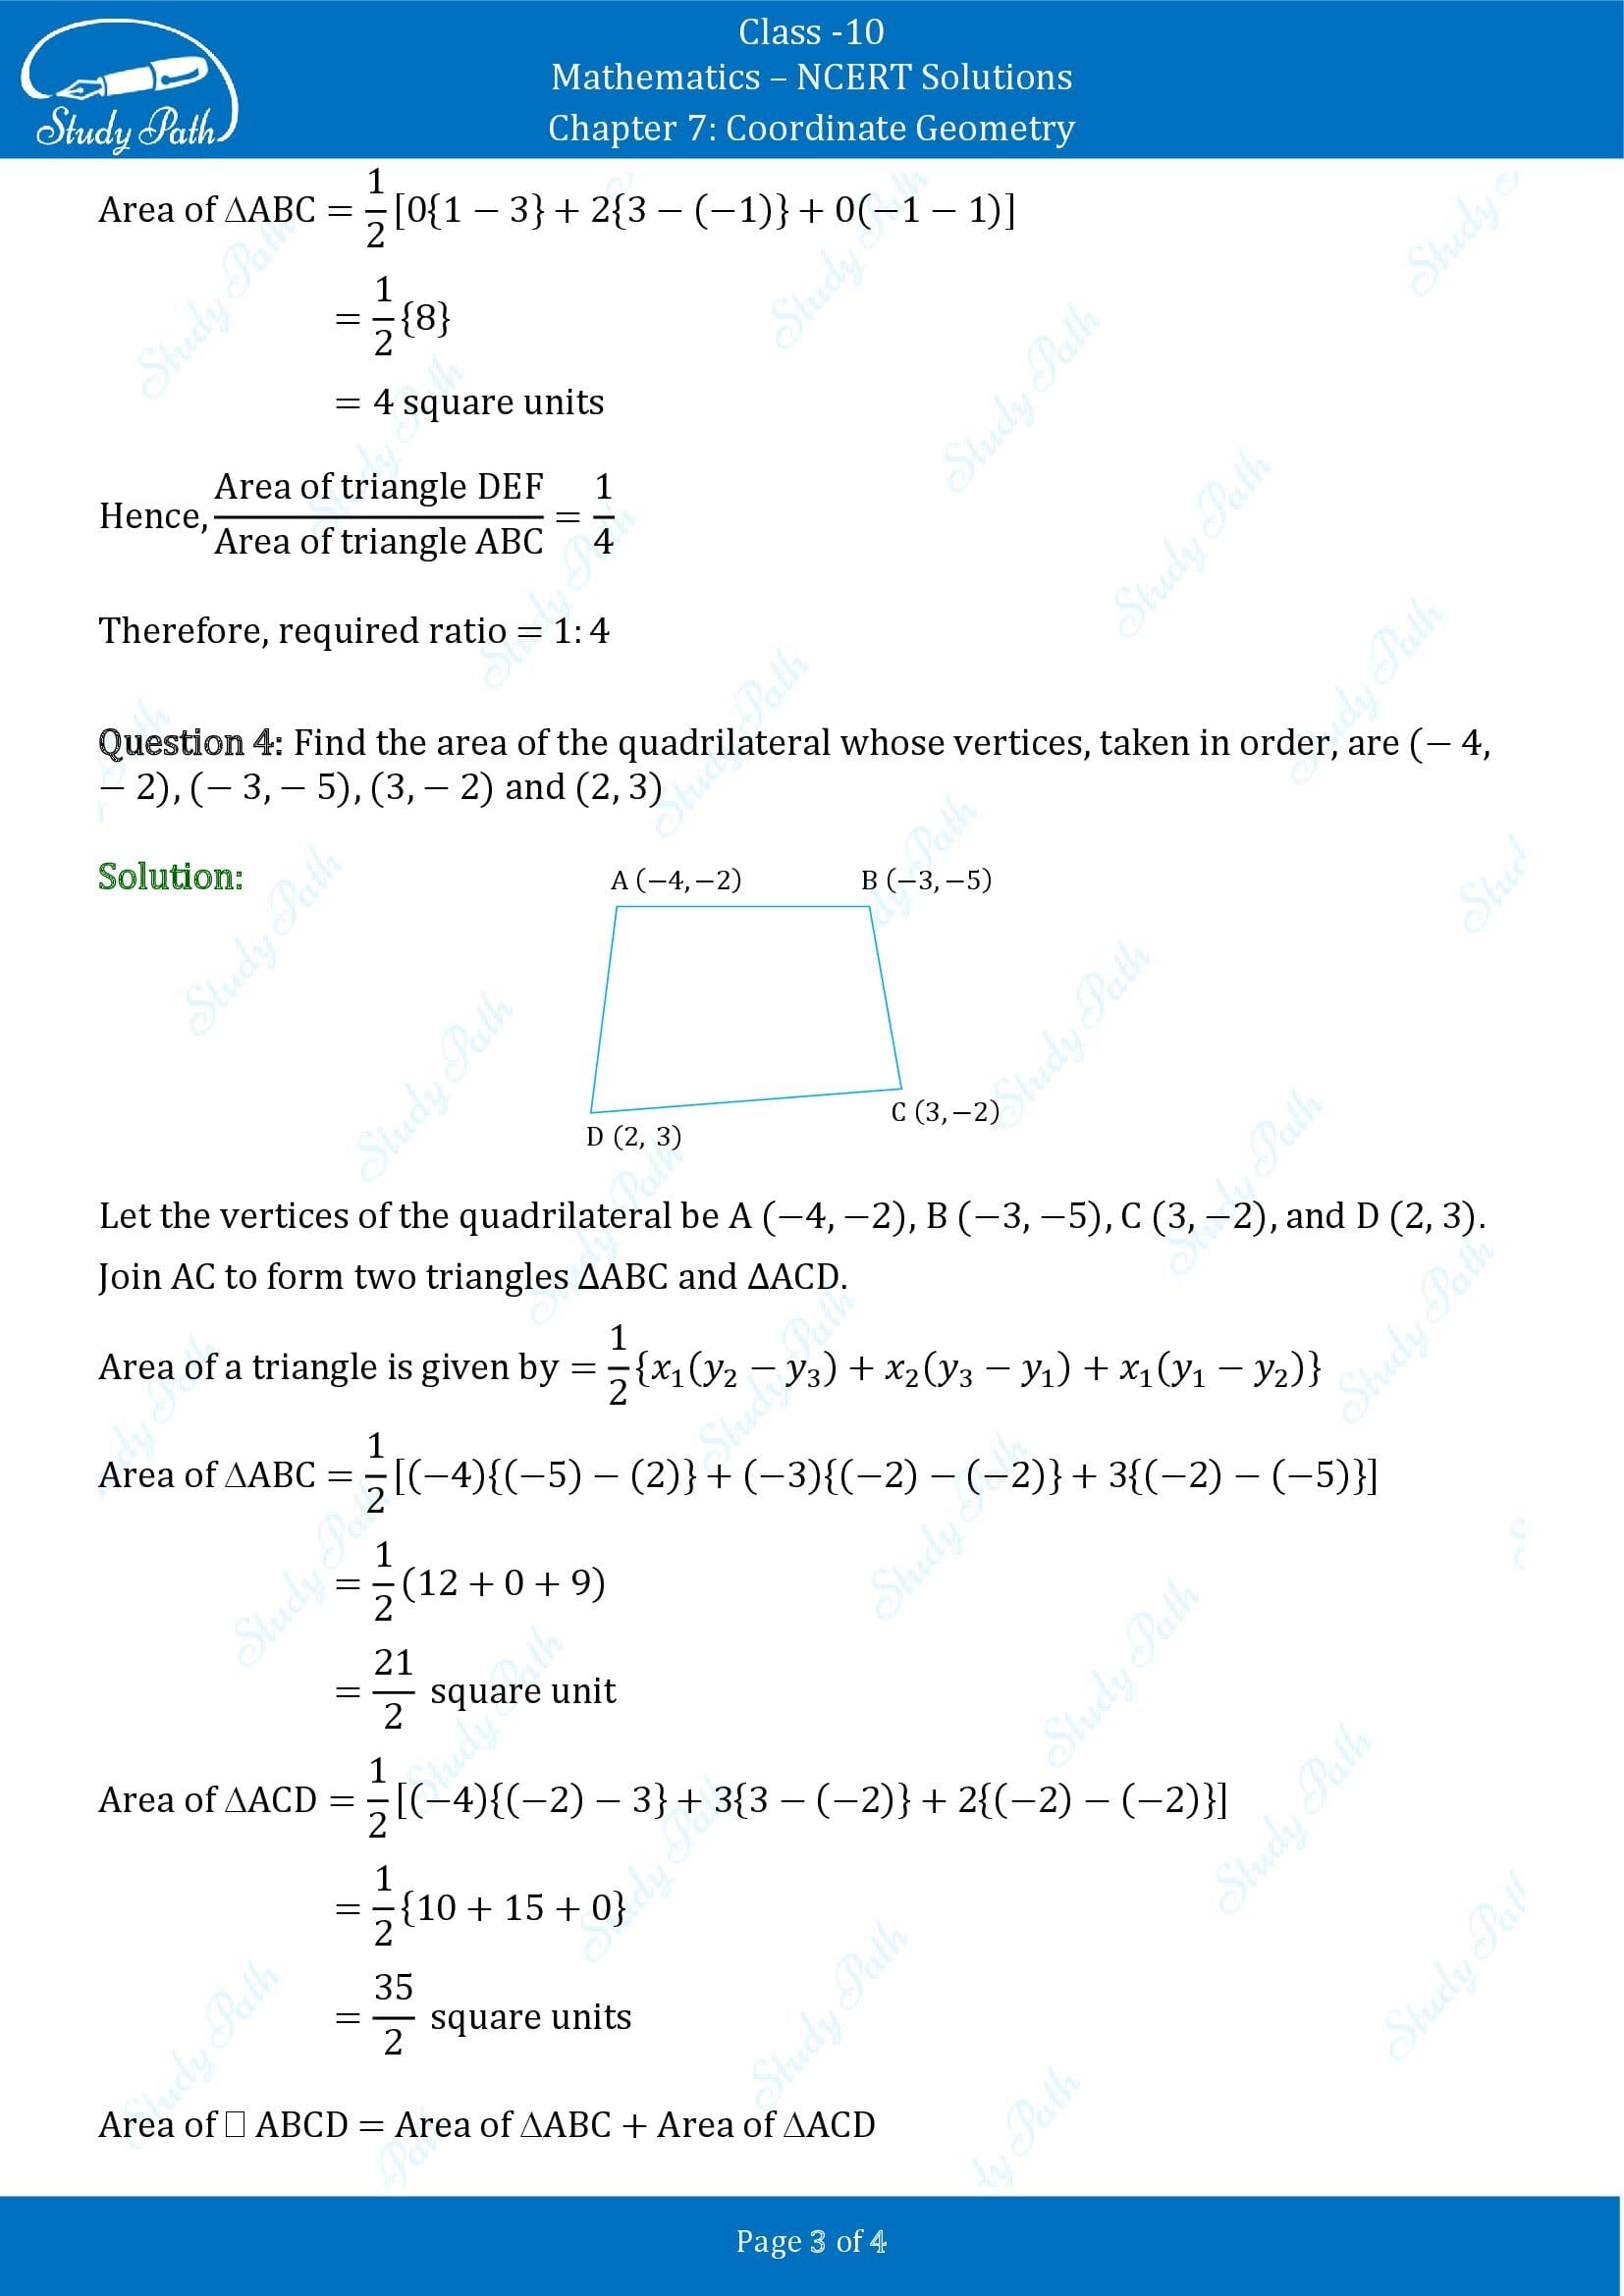 NCERT Solutions for Class 10 Maths Chapter 7 Coordinate Geometry Exercise 7.3 00003